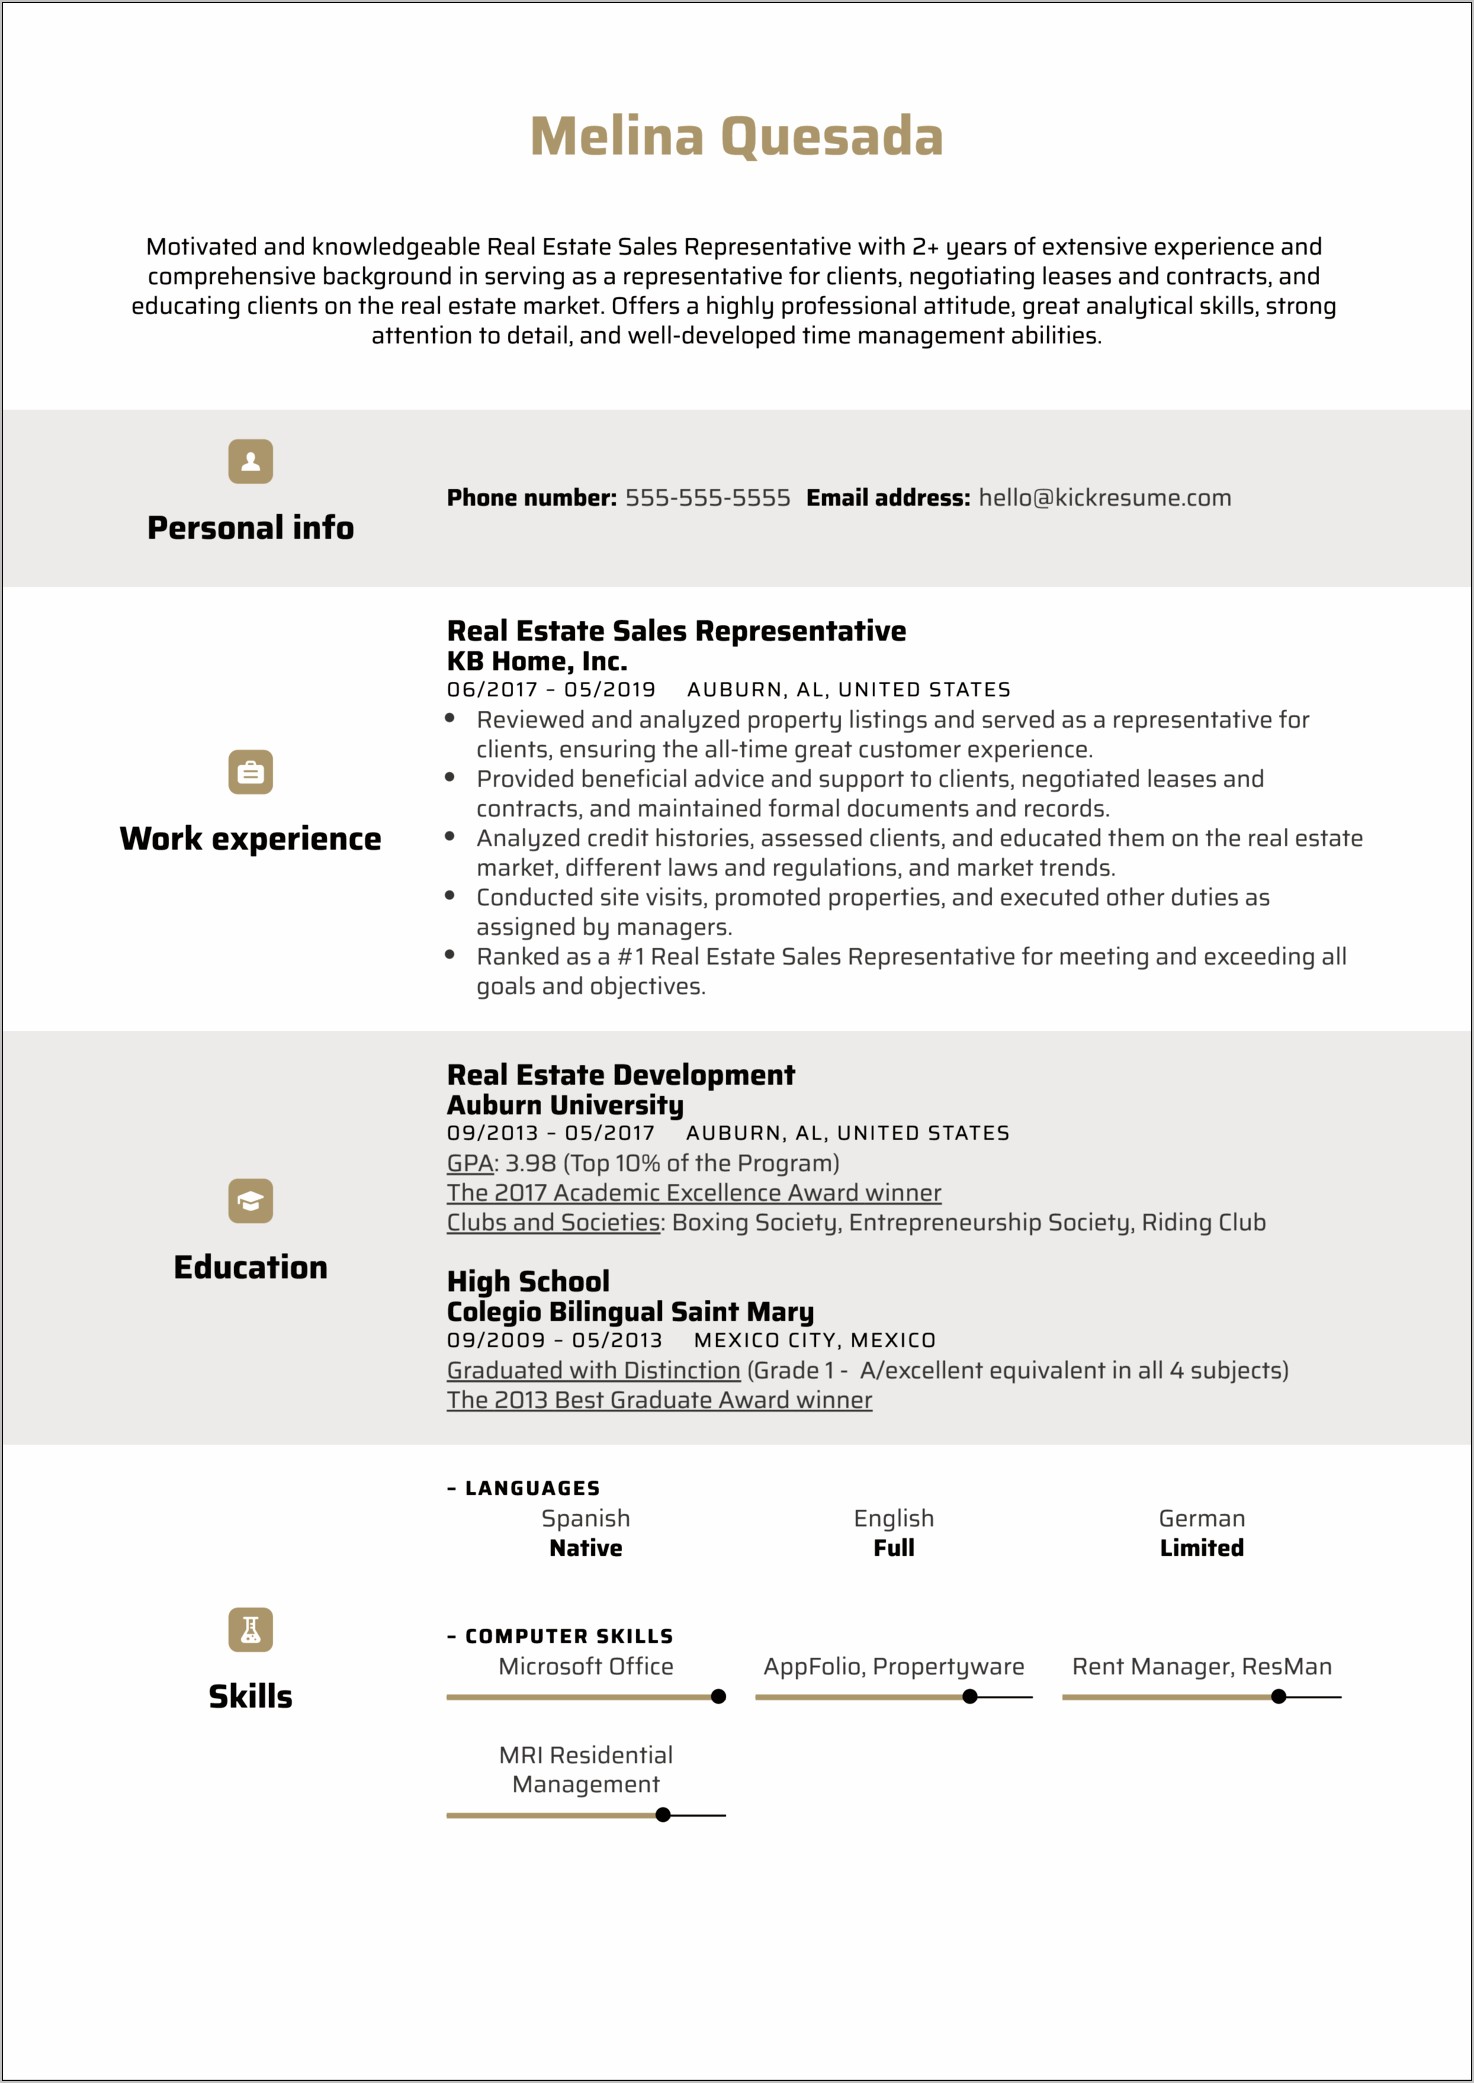 Resume With A Year Of Sales Experience